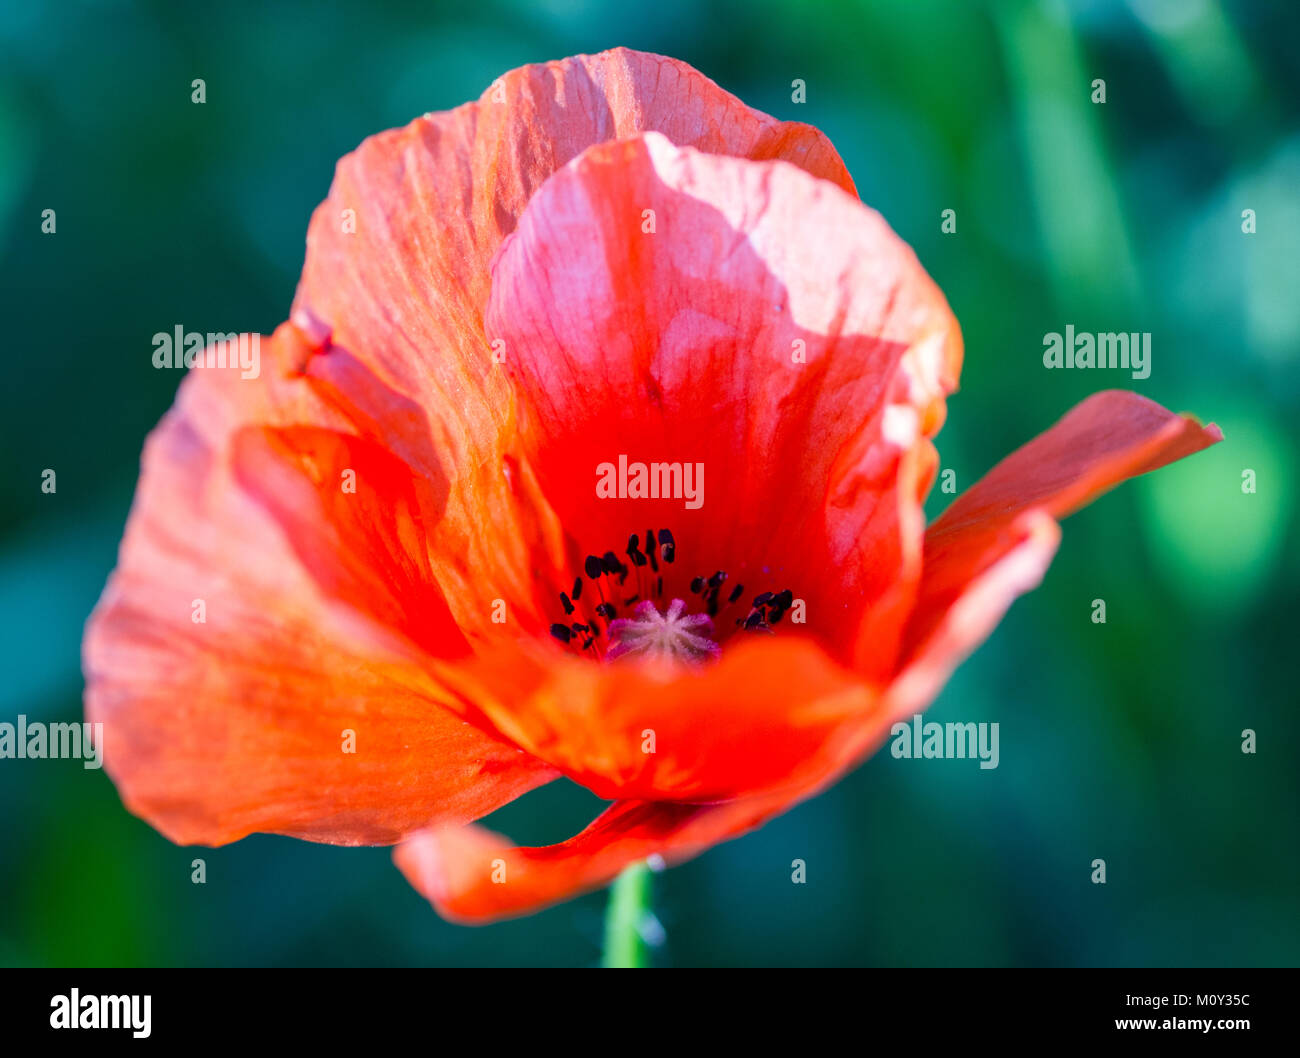 Red Wild Common poppy flower close up with stamen, filaments, pistil and anther visible on a green background, Croatia 2017 Stock Photo